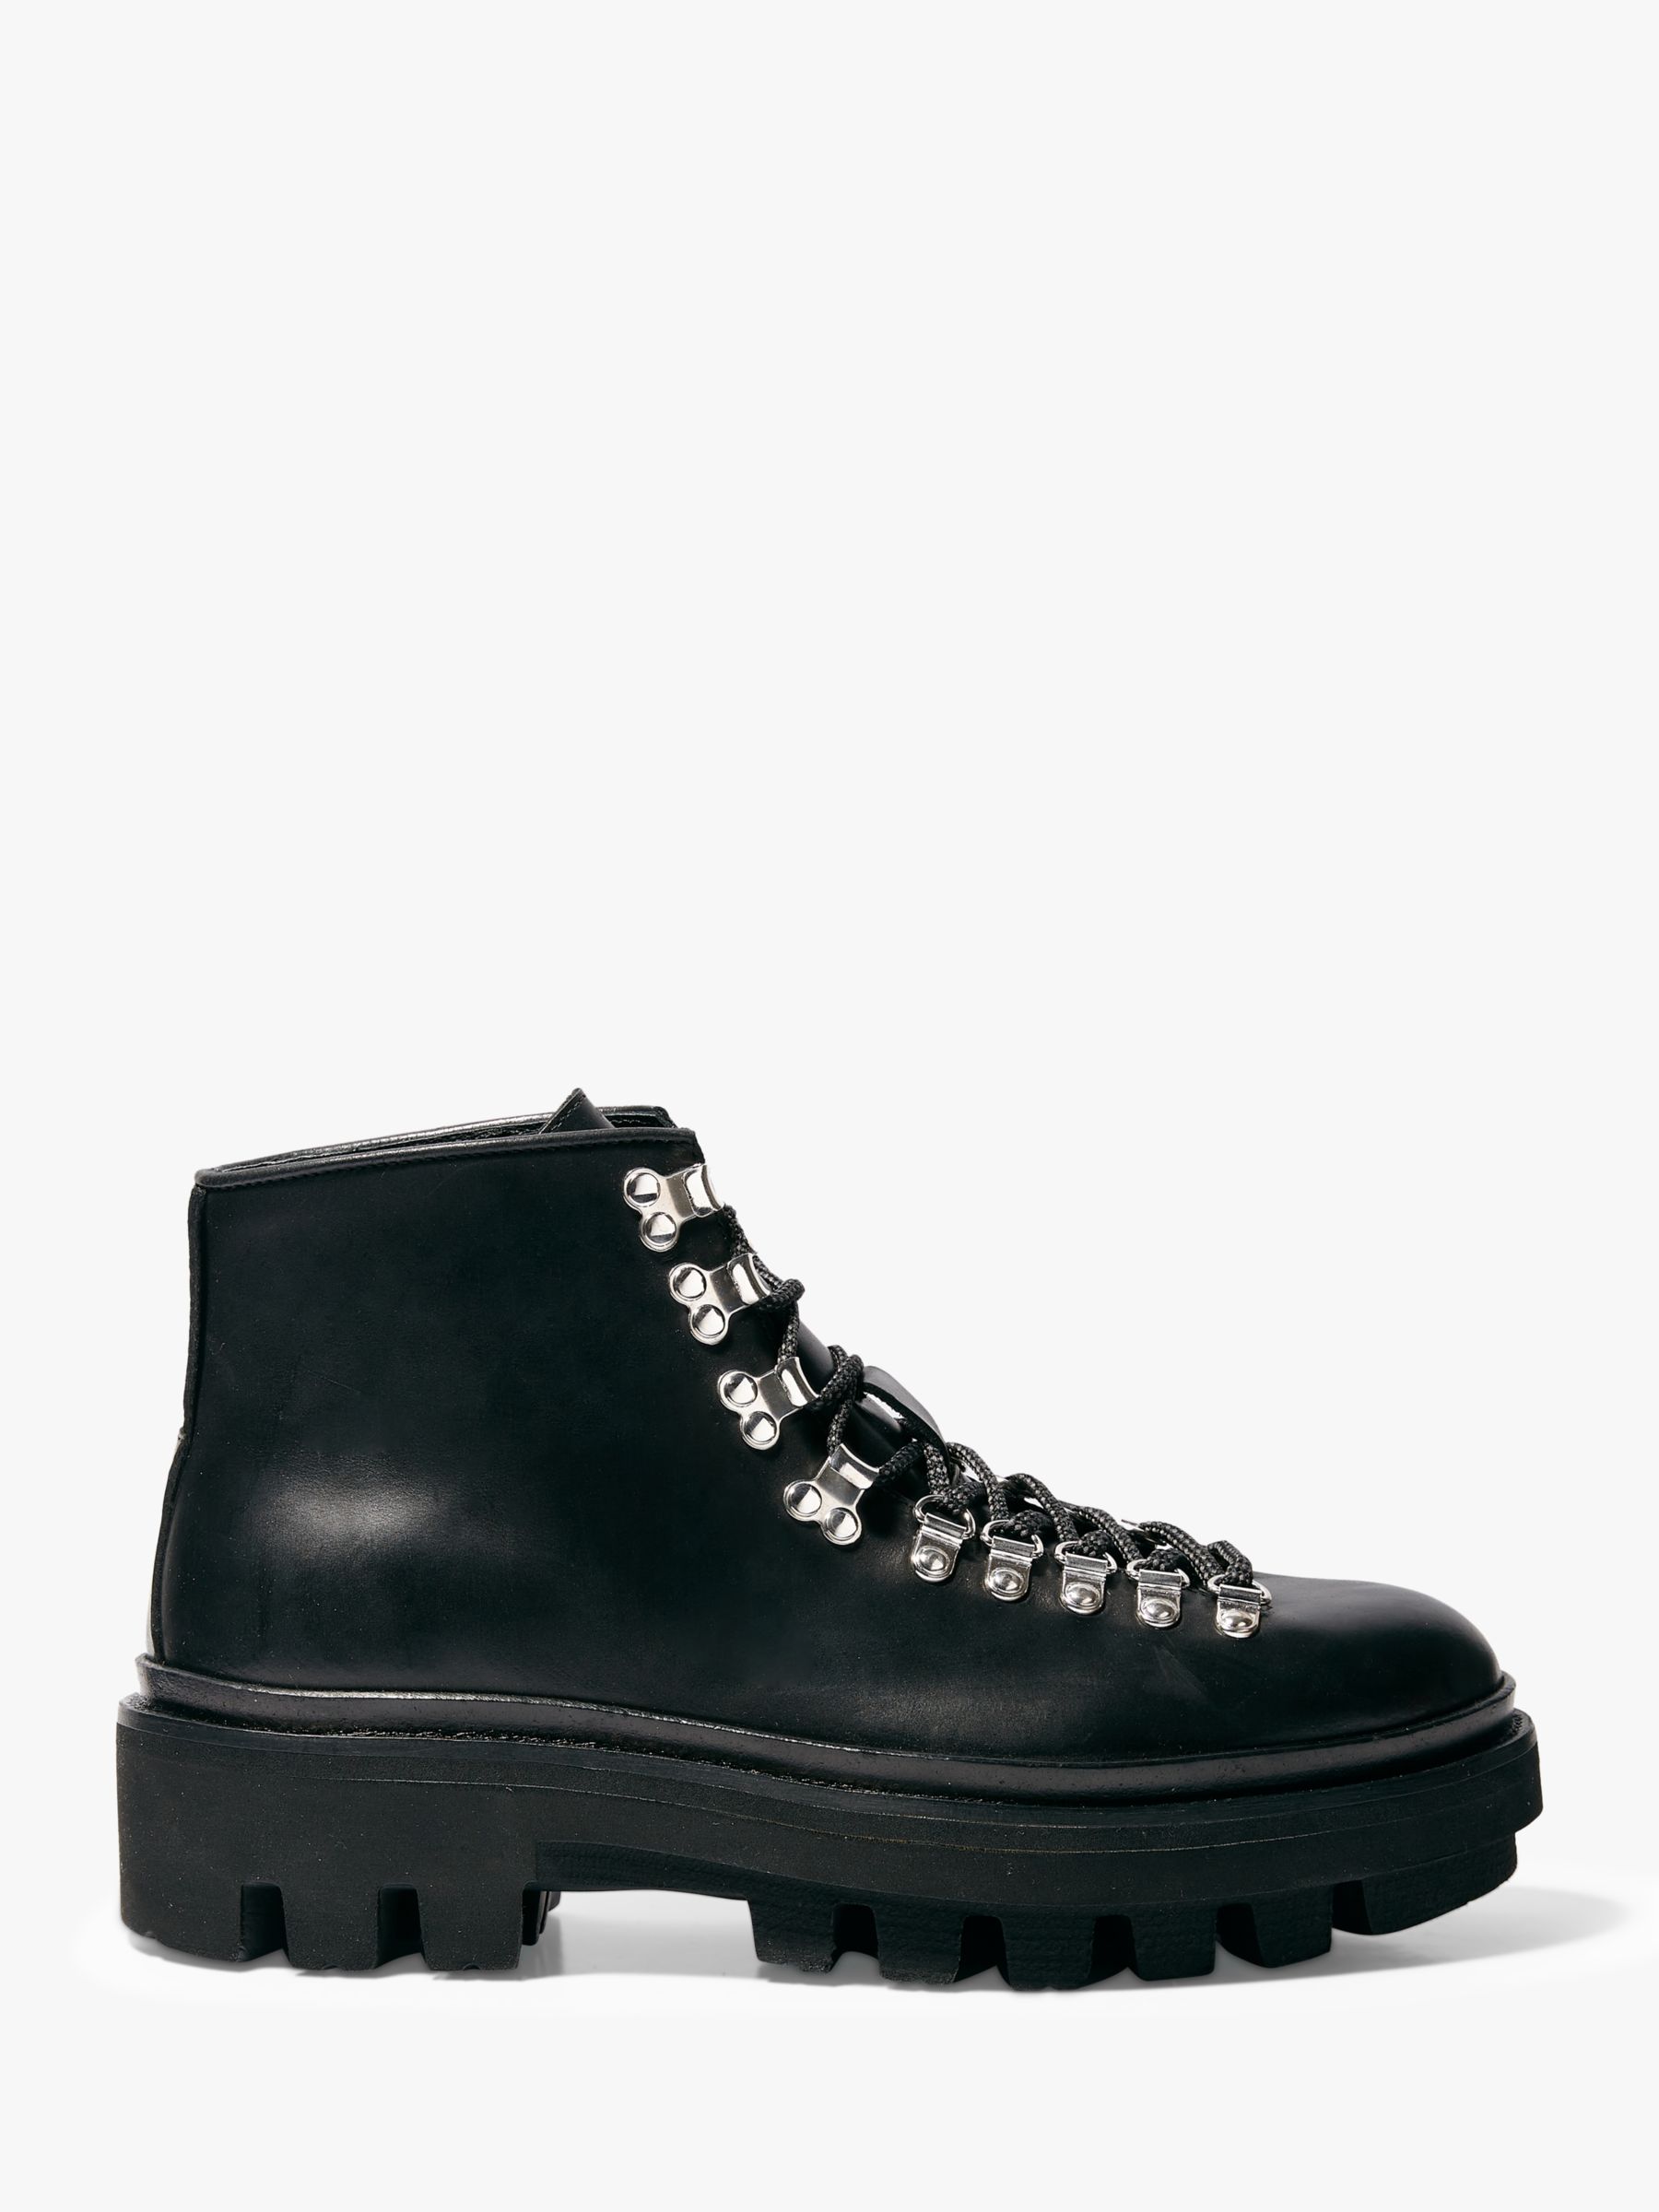 AllSaints Isaac Leather Boots, Black